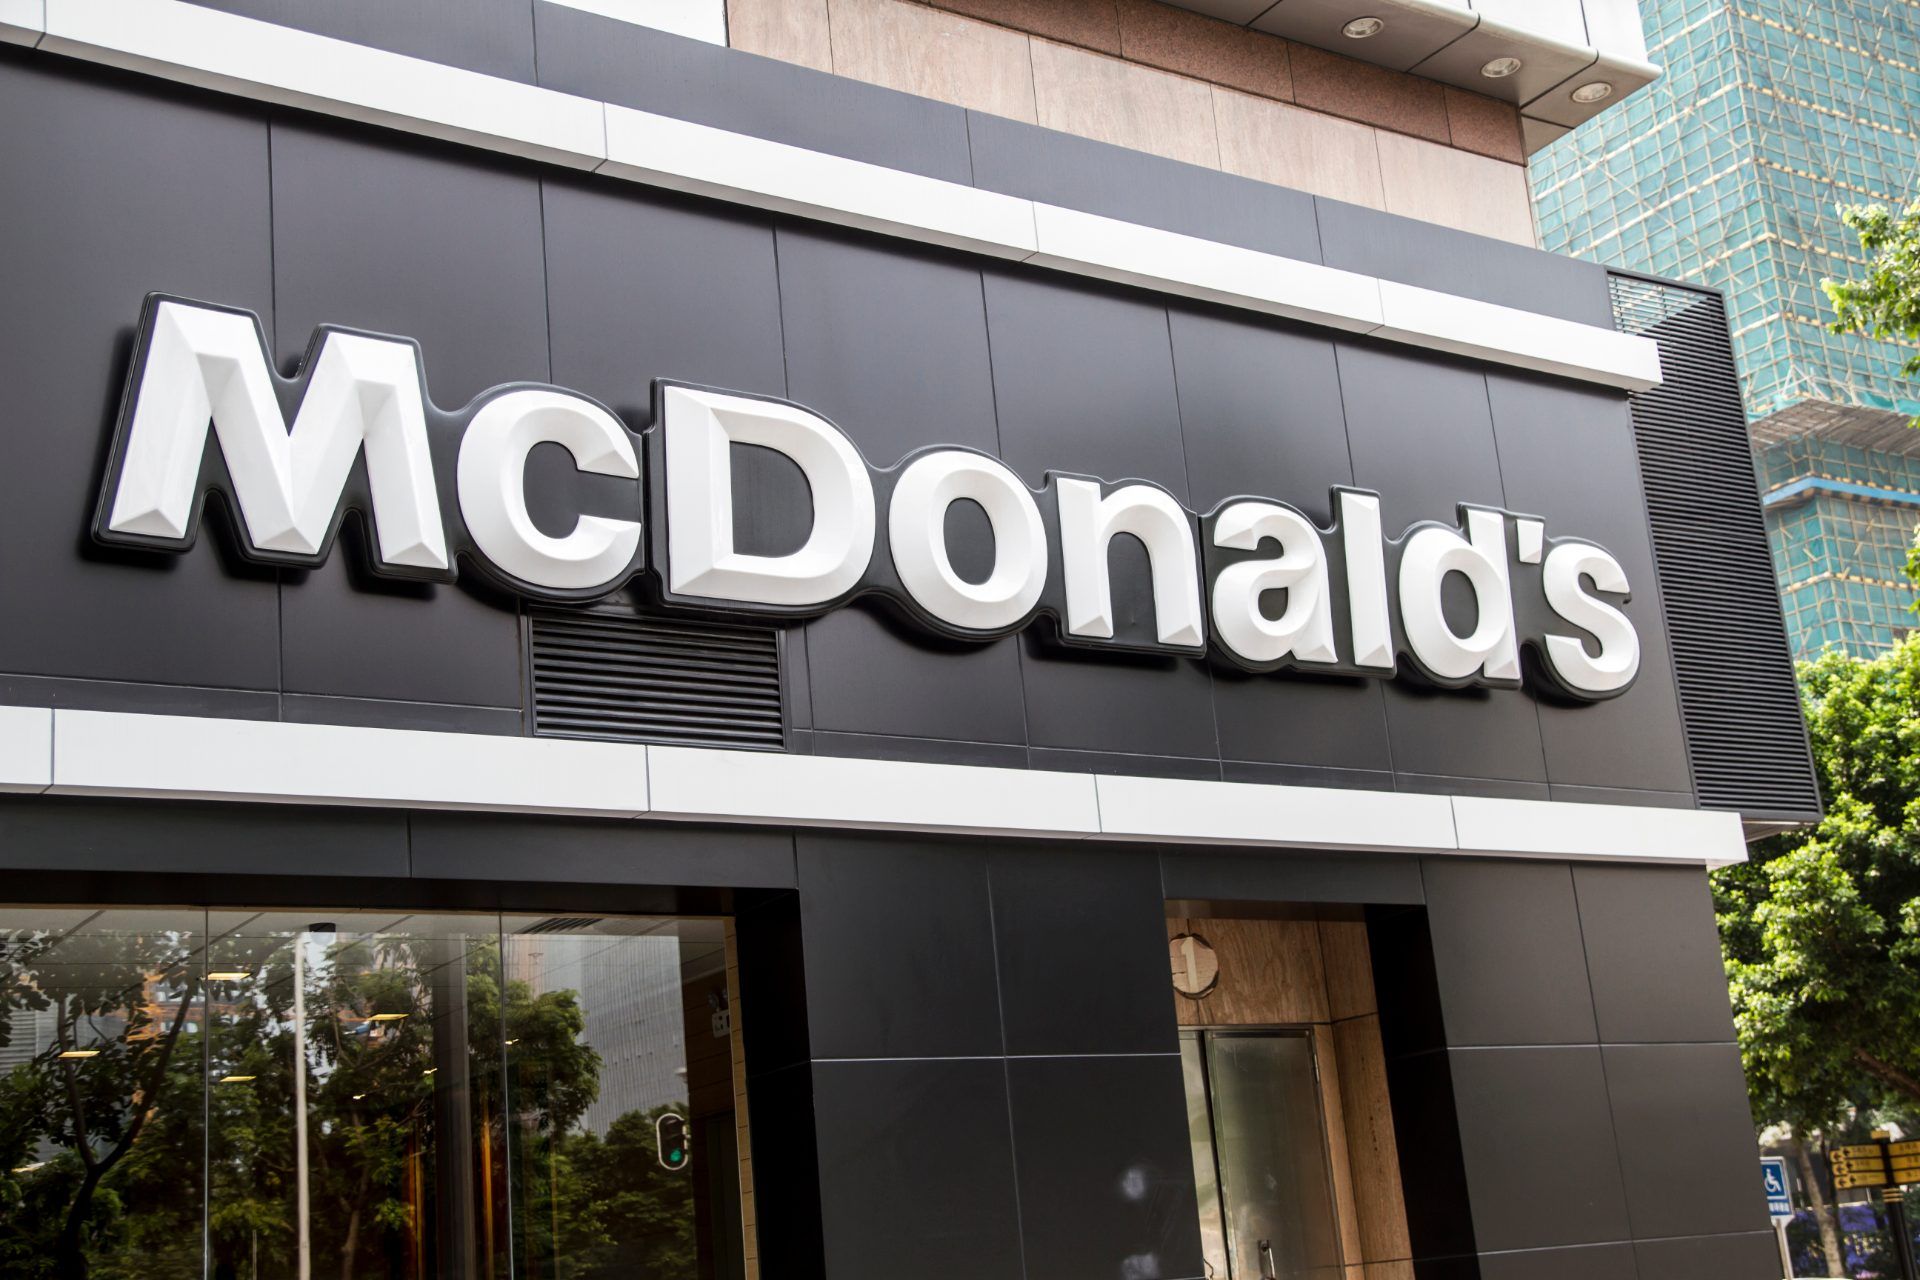 McDonald's sign on storefront - McDonald's franchise owners